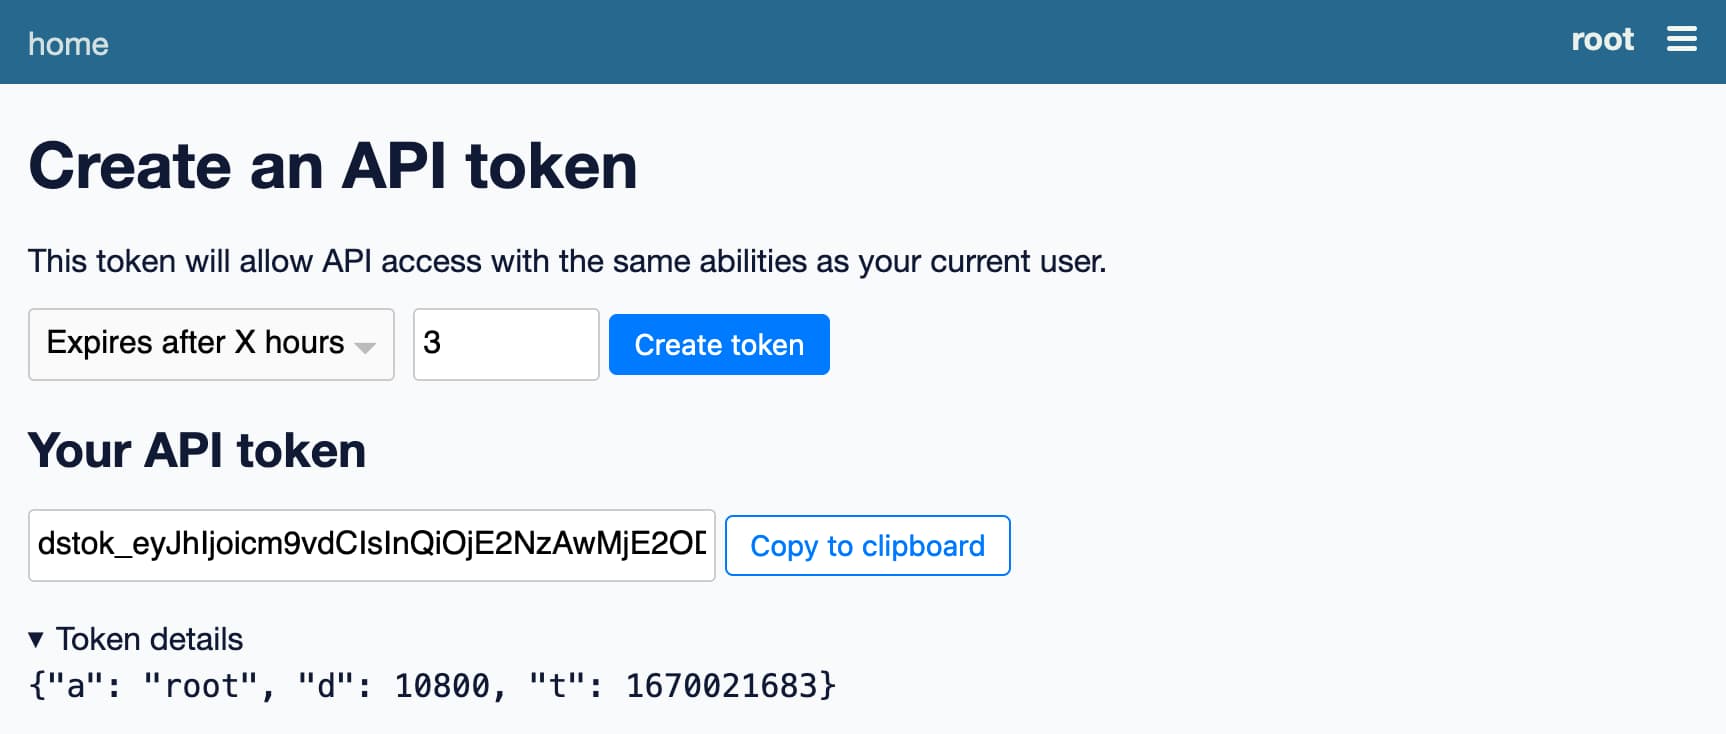 The Create an API token page lets you create a token that expires after a set number of hours - you can then copy that token to your clipboard